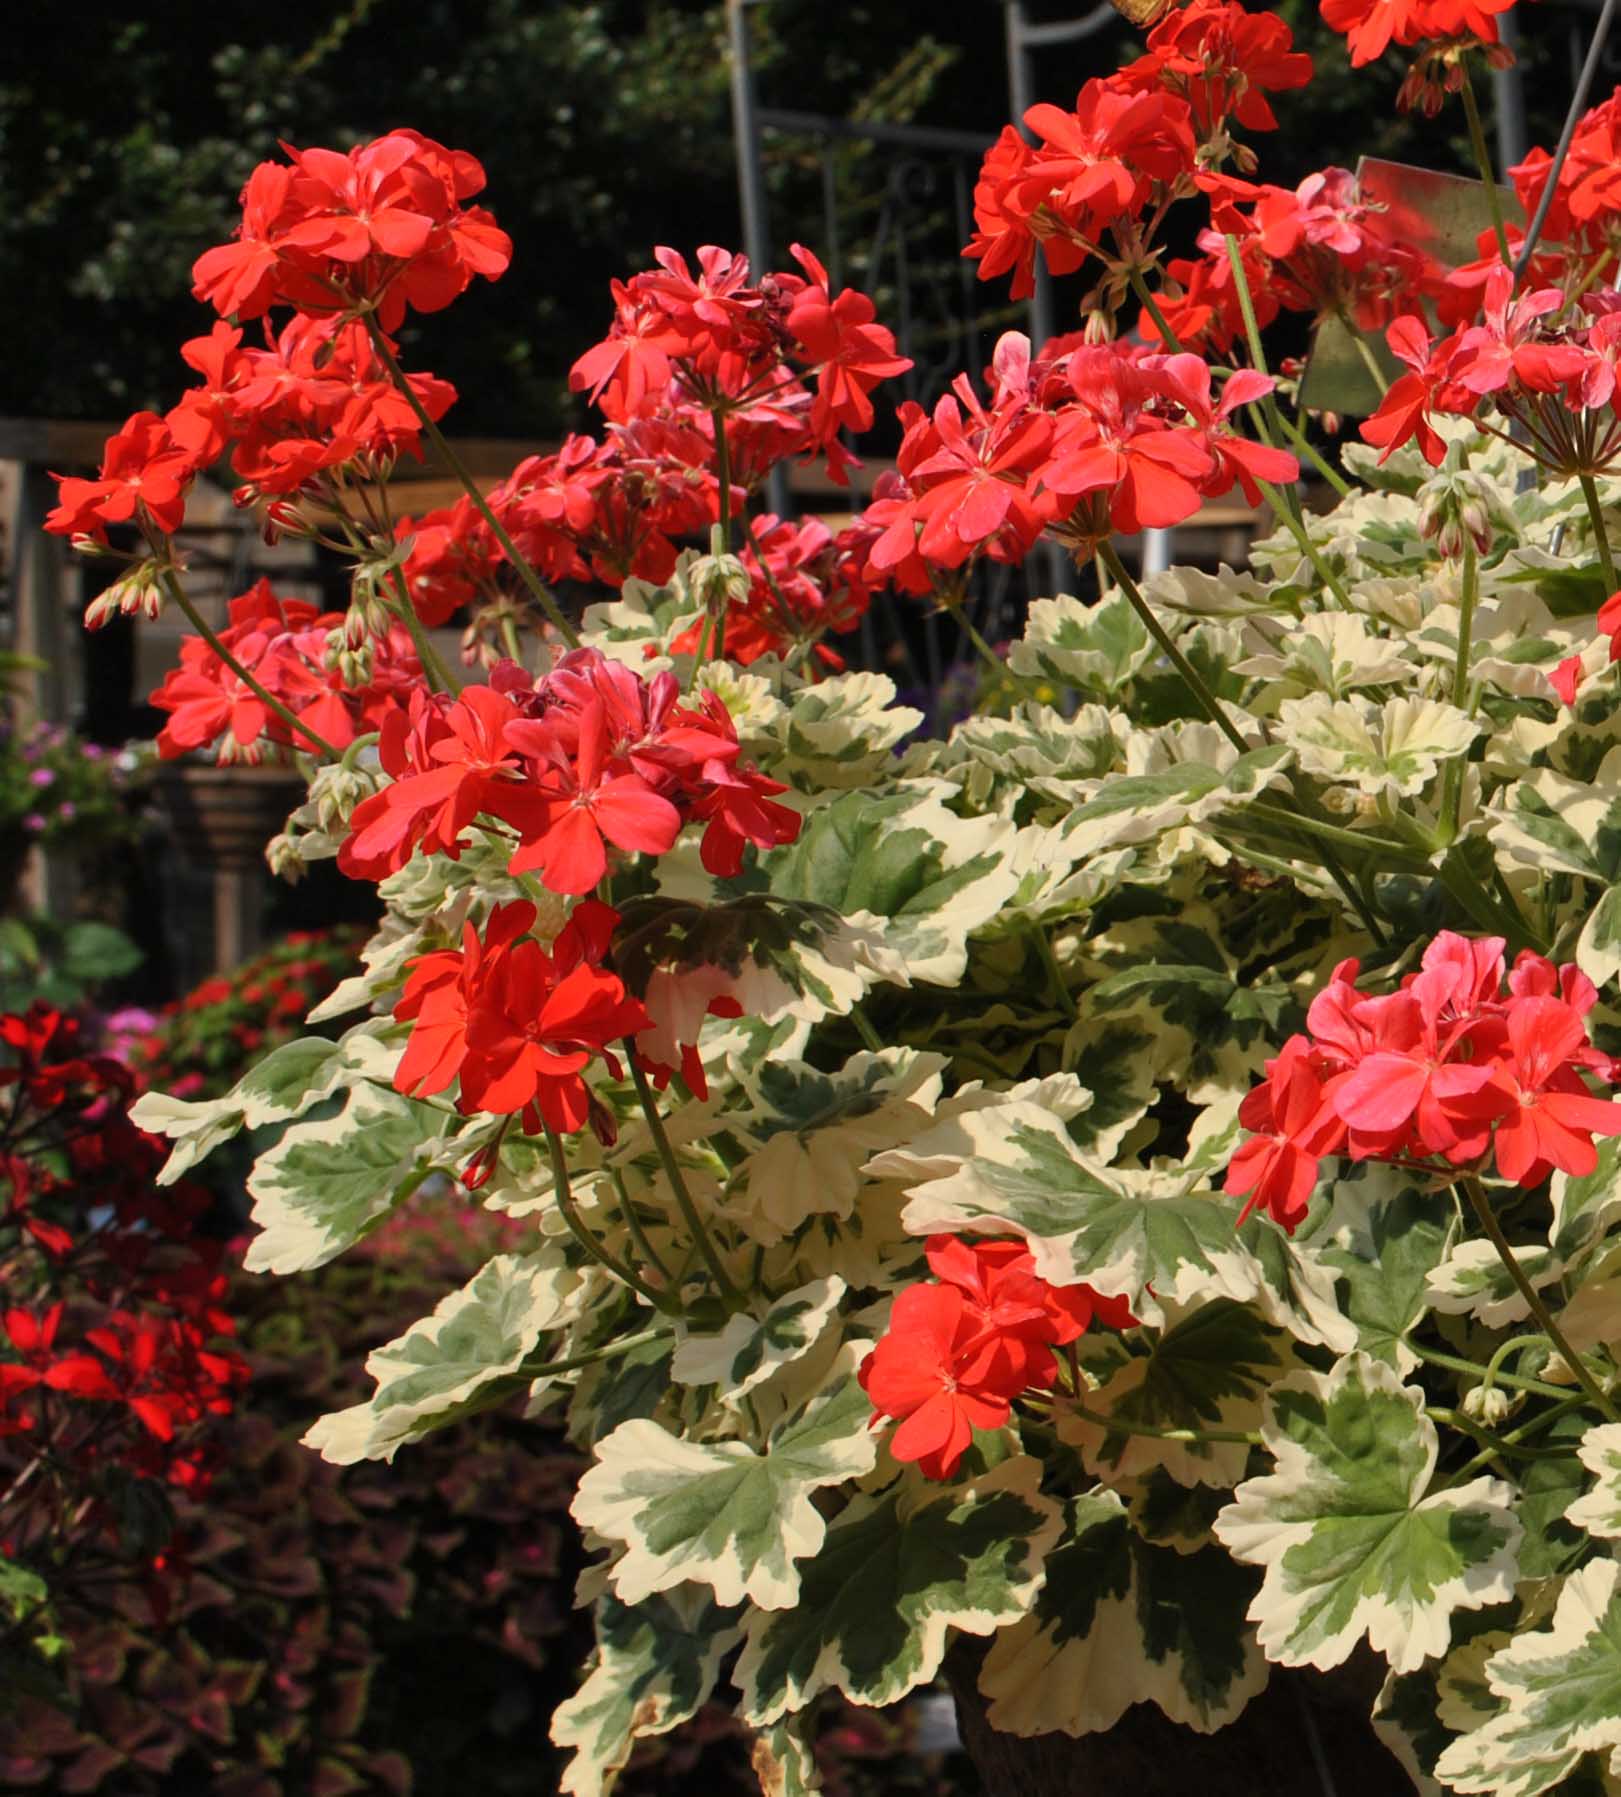 “Glitterati™ Ice Queen was grown in hanging baskets in our garden where they thrived in the hot, blazing sun. The variegated leaves did not brown in the sun, but remained healthy all summer. This geranium produced numerous orangish-red blooms that were evenly distributed throughout the plants thus creating a lovely mounding appearance.”